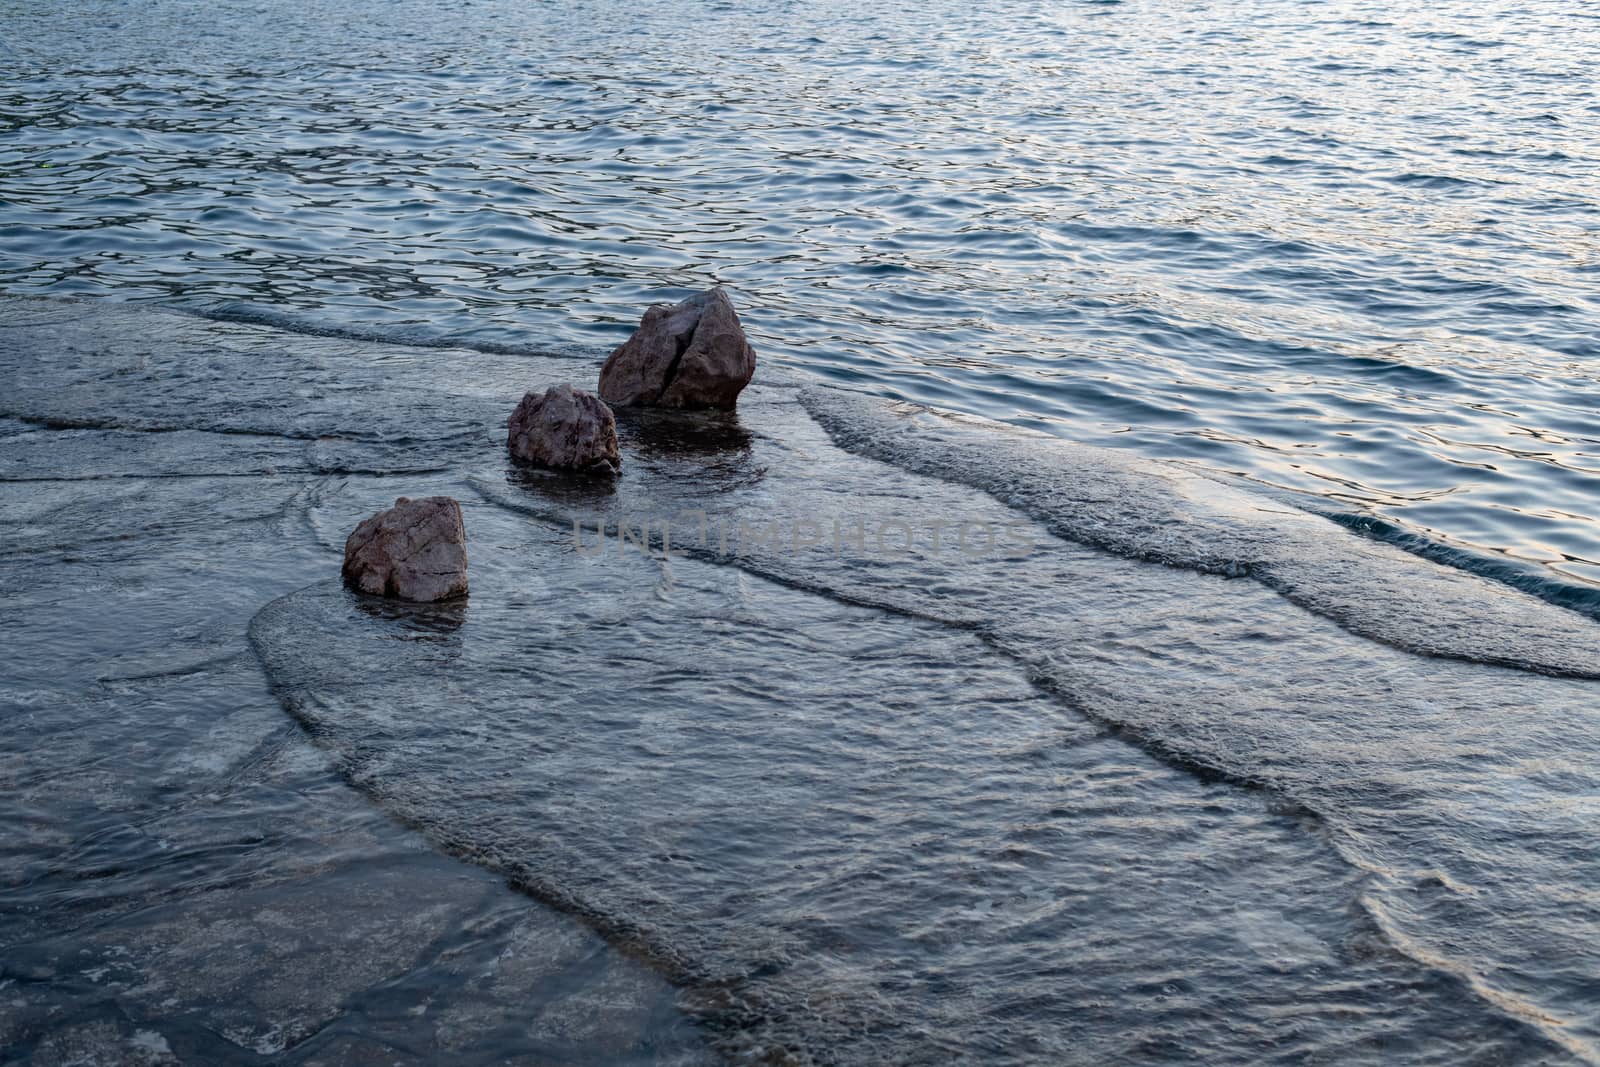 Beach after sunset, small waves, ripples hitting beach with rocks, flushing over, three rocks in row overlapping, tranquil scene